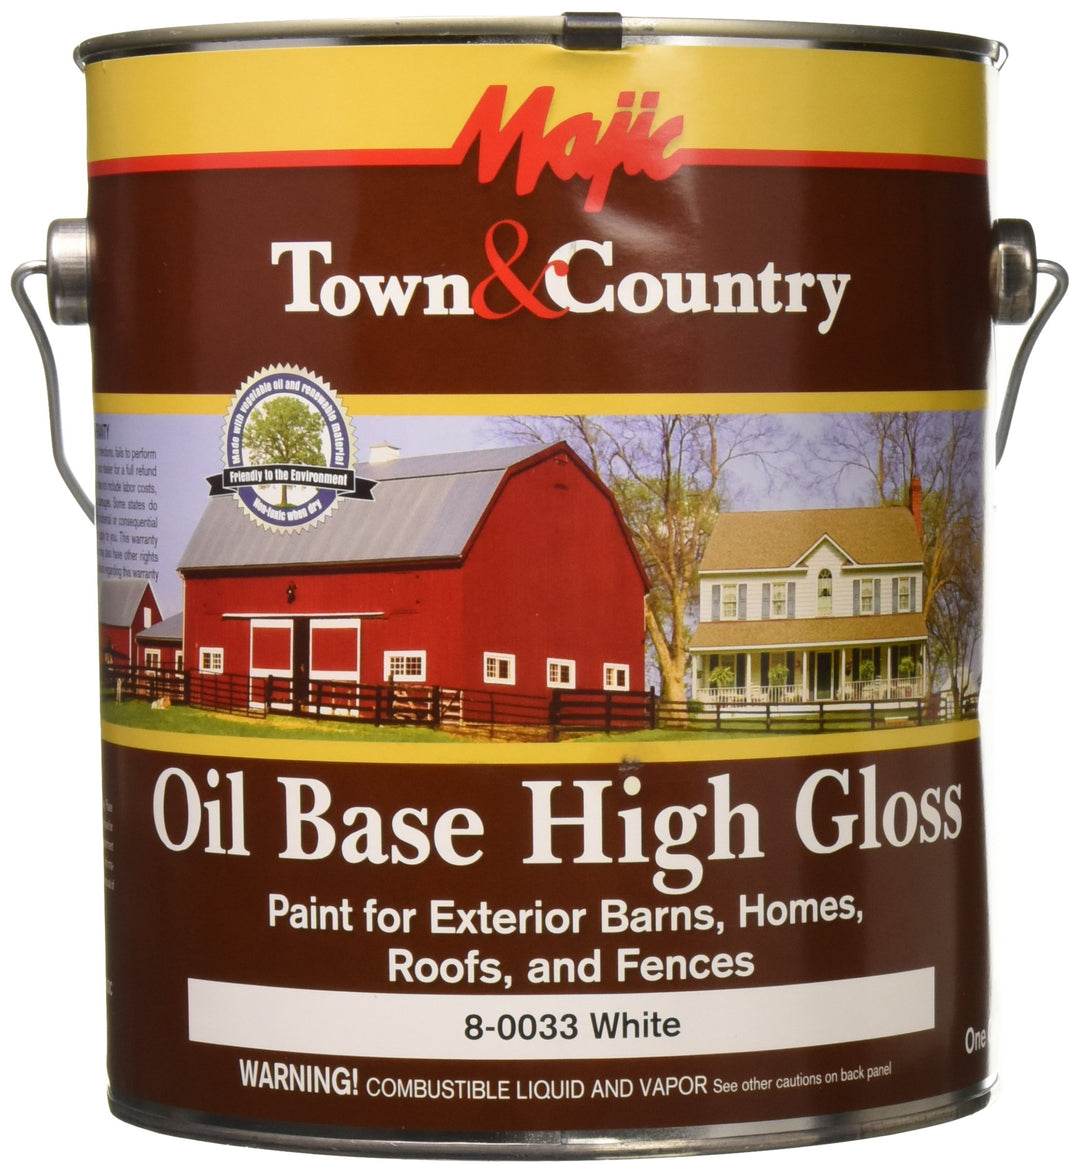 YENKIN MAJESTIC PAINT 8-0033-1 Gloss Barn Home Roof & Fence Oil Based Paint